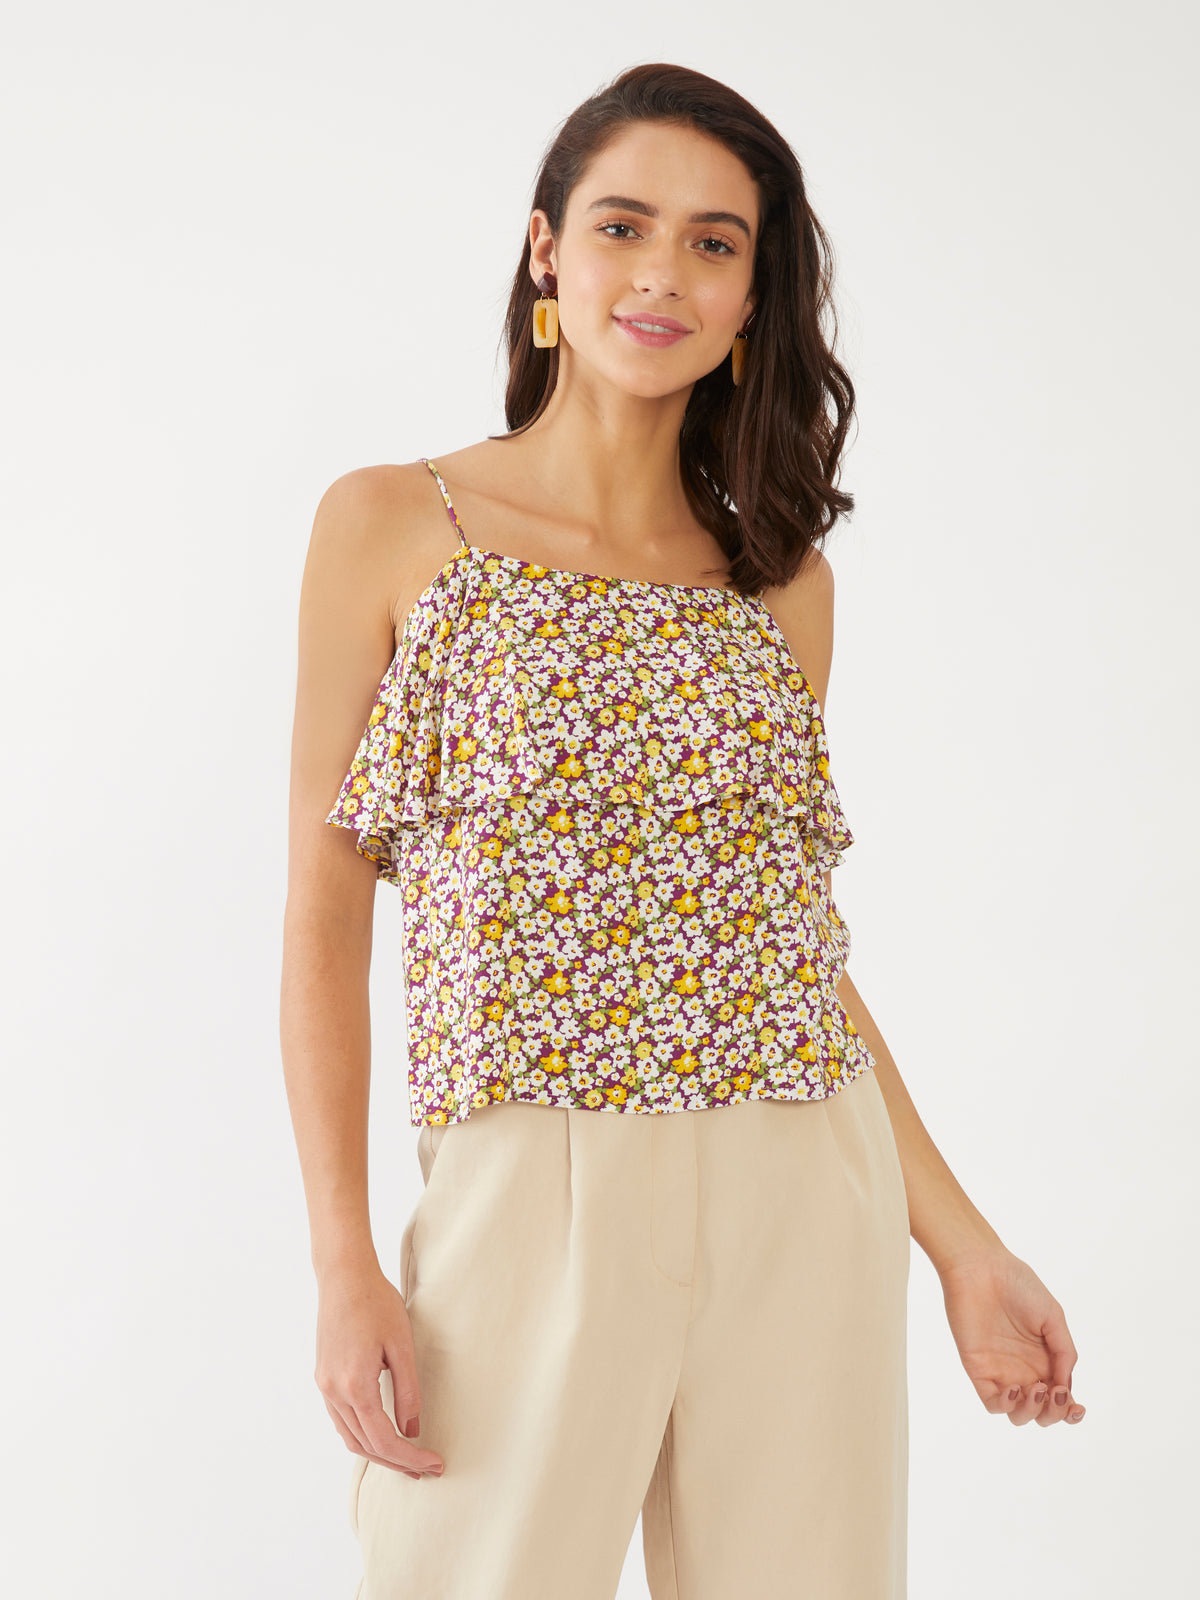 Multicolored Floral Print Strappy Top For Women